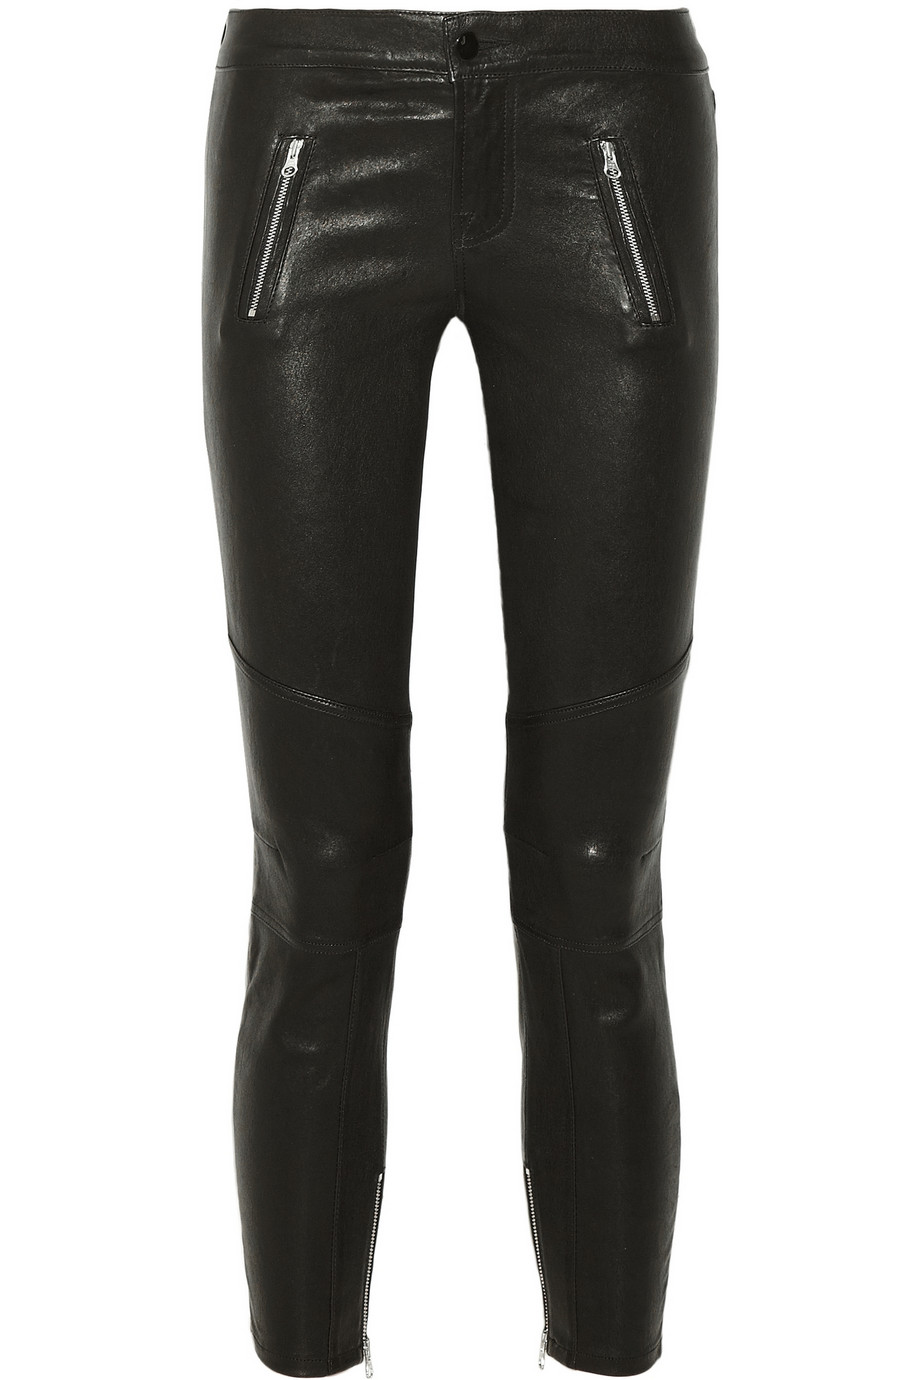 J Brand L1340 Julia Cropped Mid-Rise Leather Pants in Black - Lyst